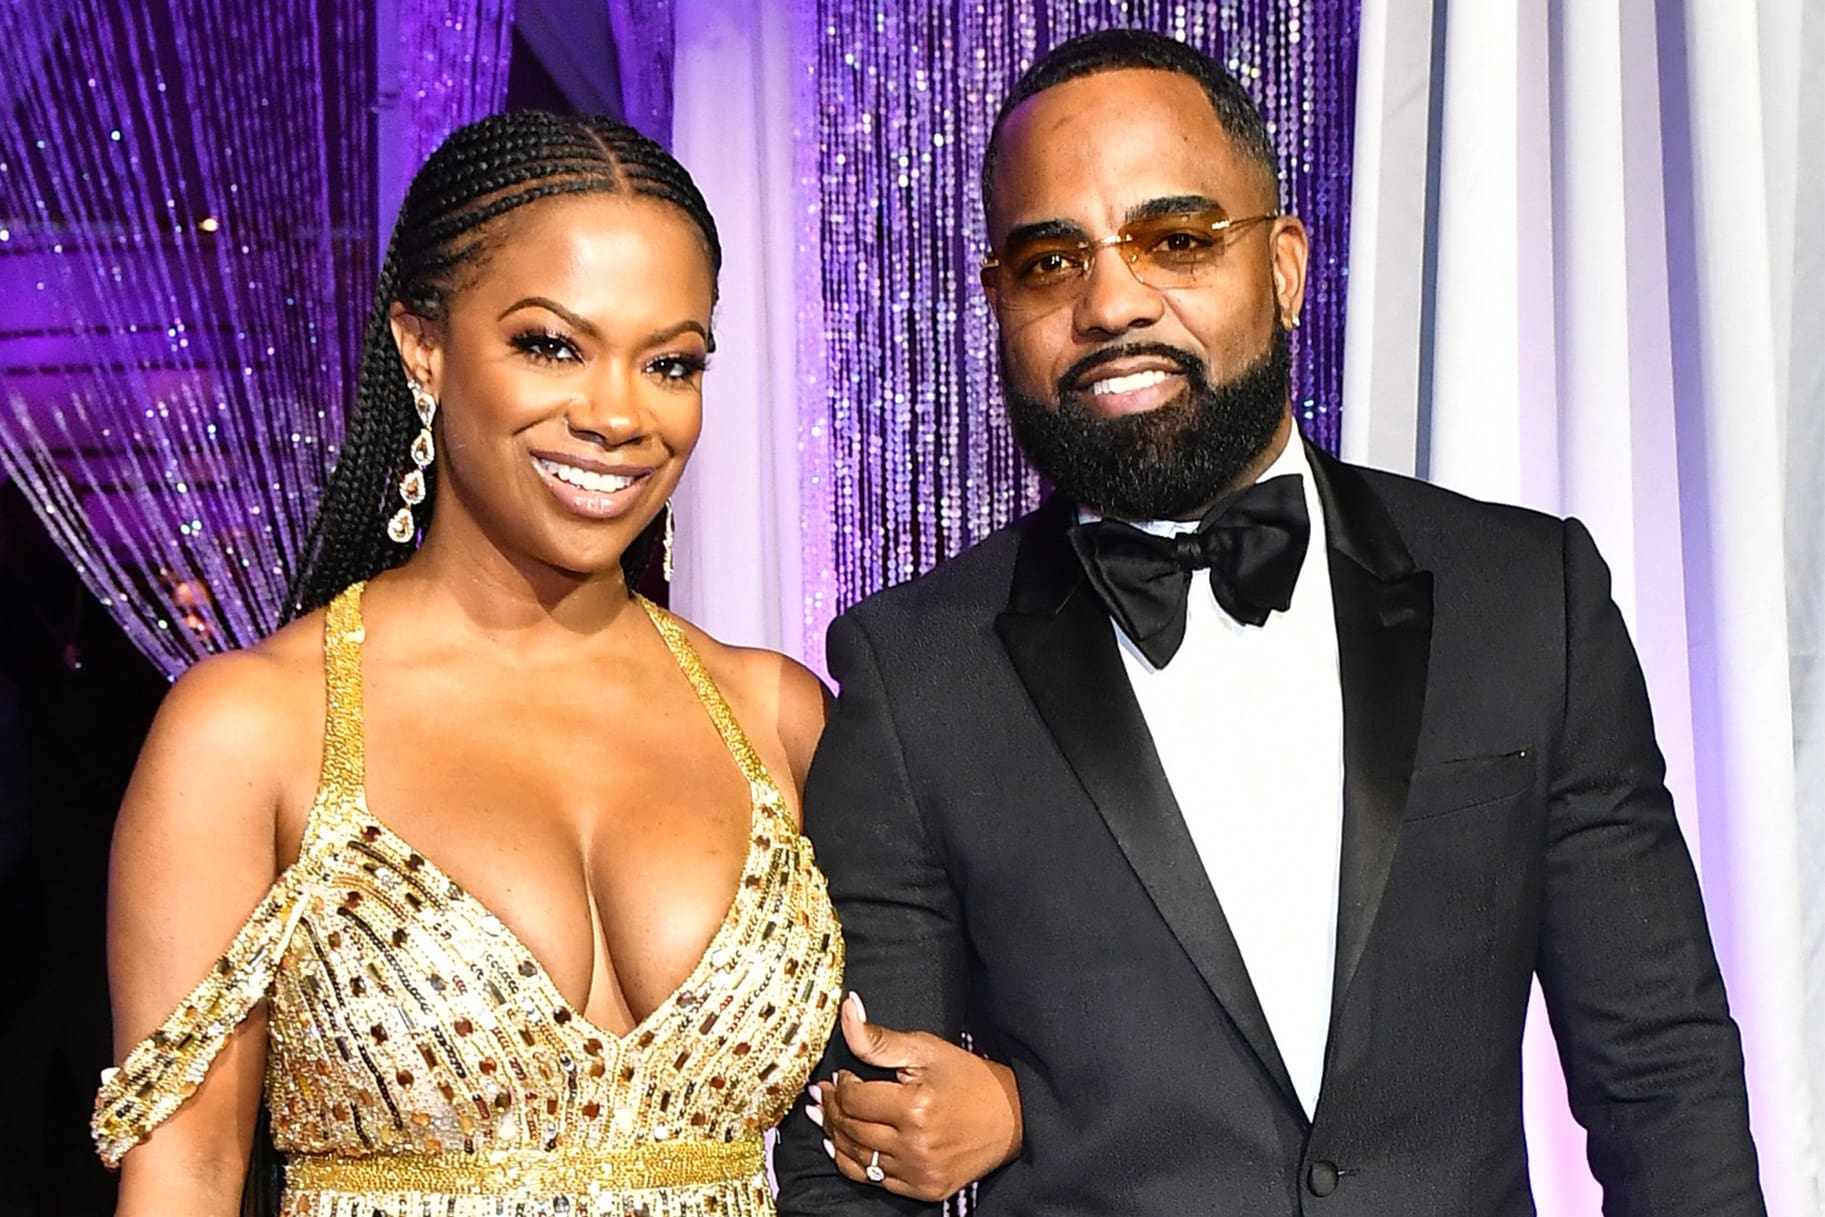 Kandi Burruss has A Life Update On Her YouTube Channel - Here's Her Video